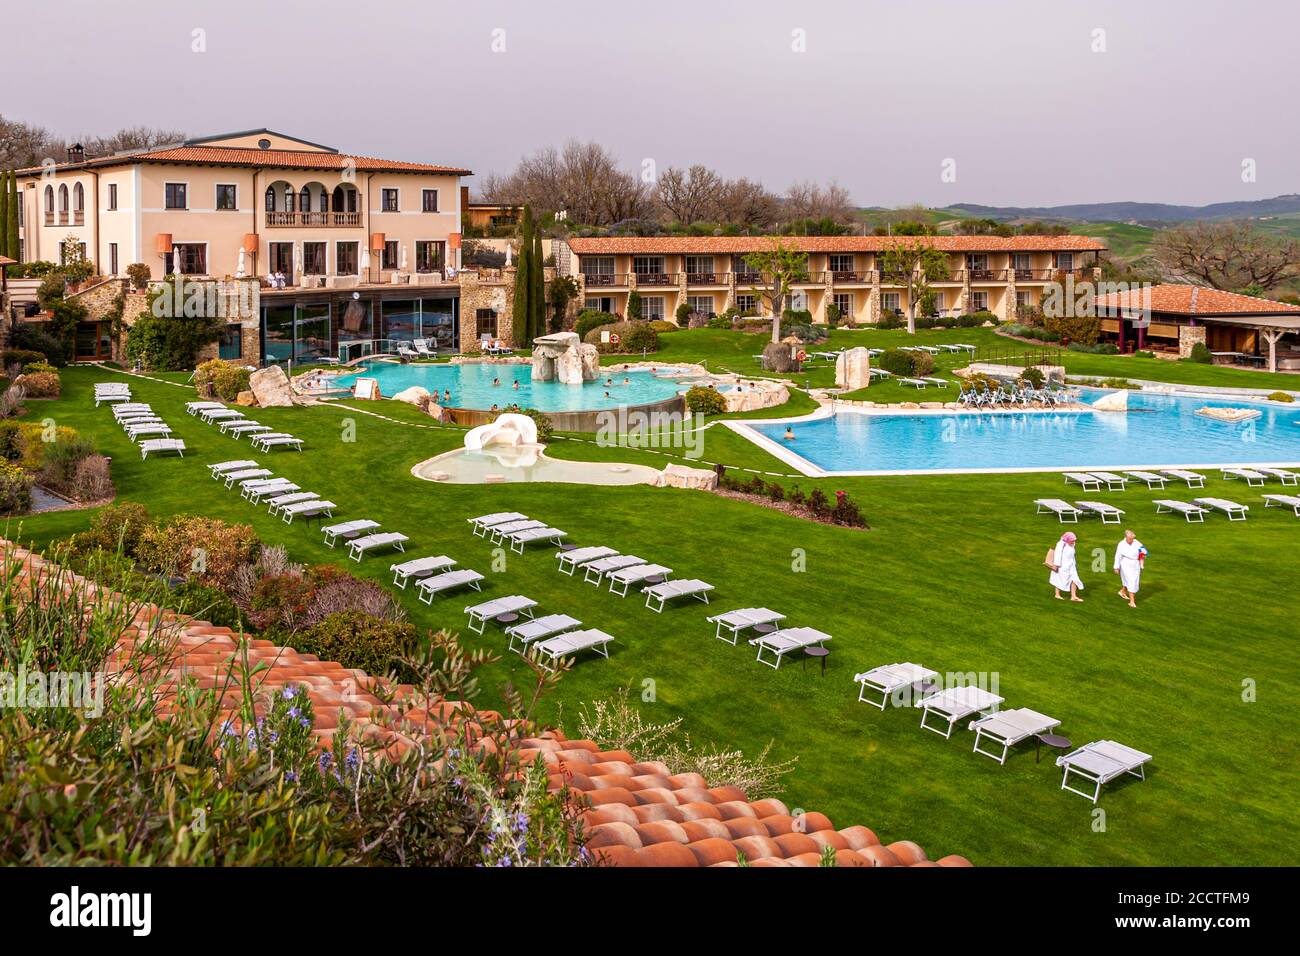 Hotel Adler Thermae, Bagno Vignoni, Tuscany with thermal pool, Tuscany, Val d'orcia Italy, UNESCO World Heritage, Stock Photo